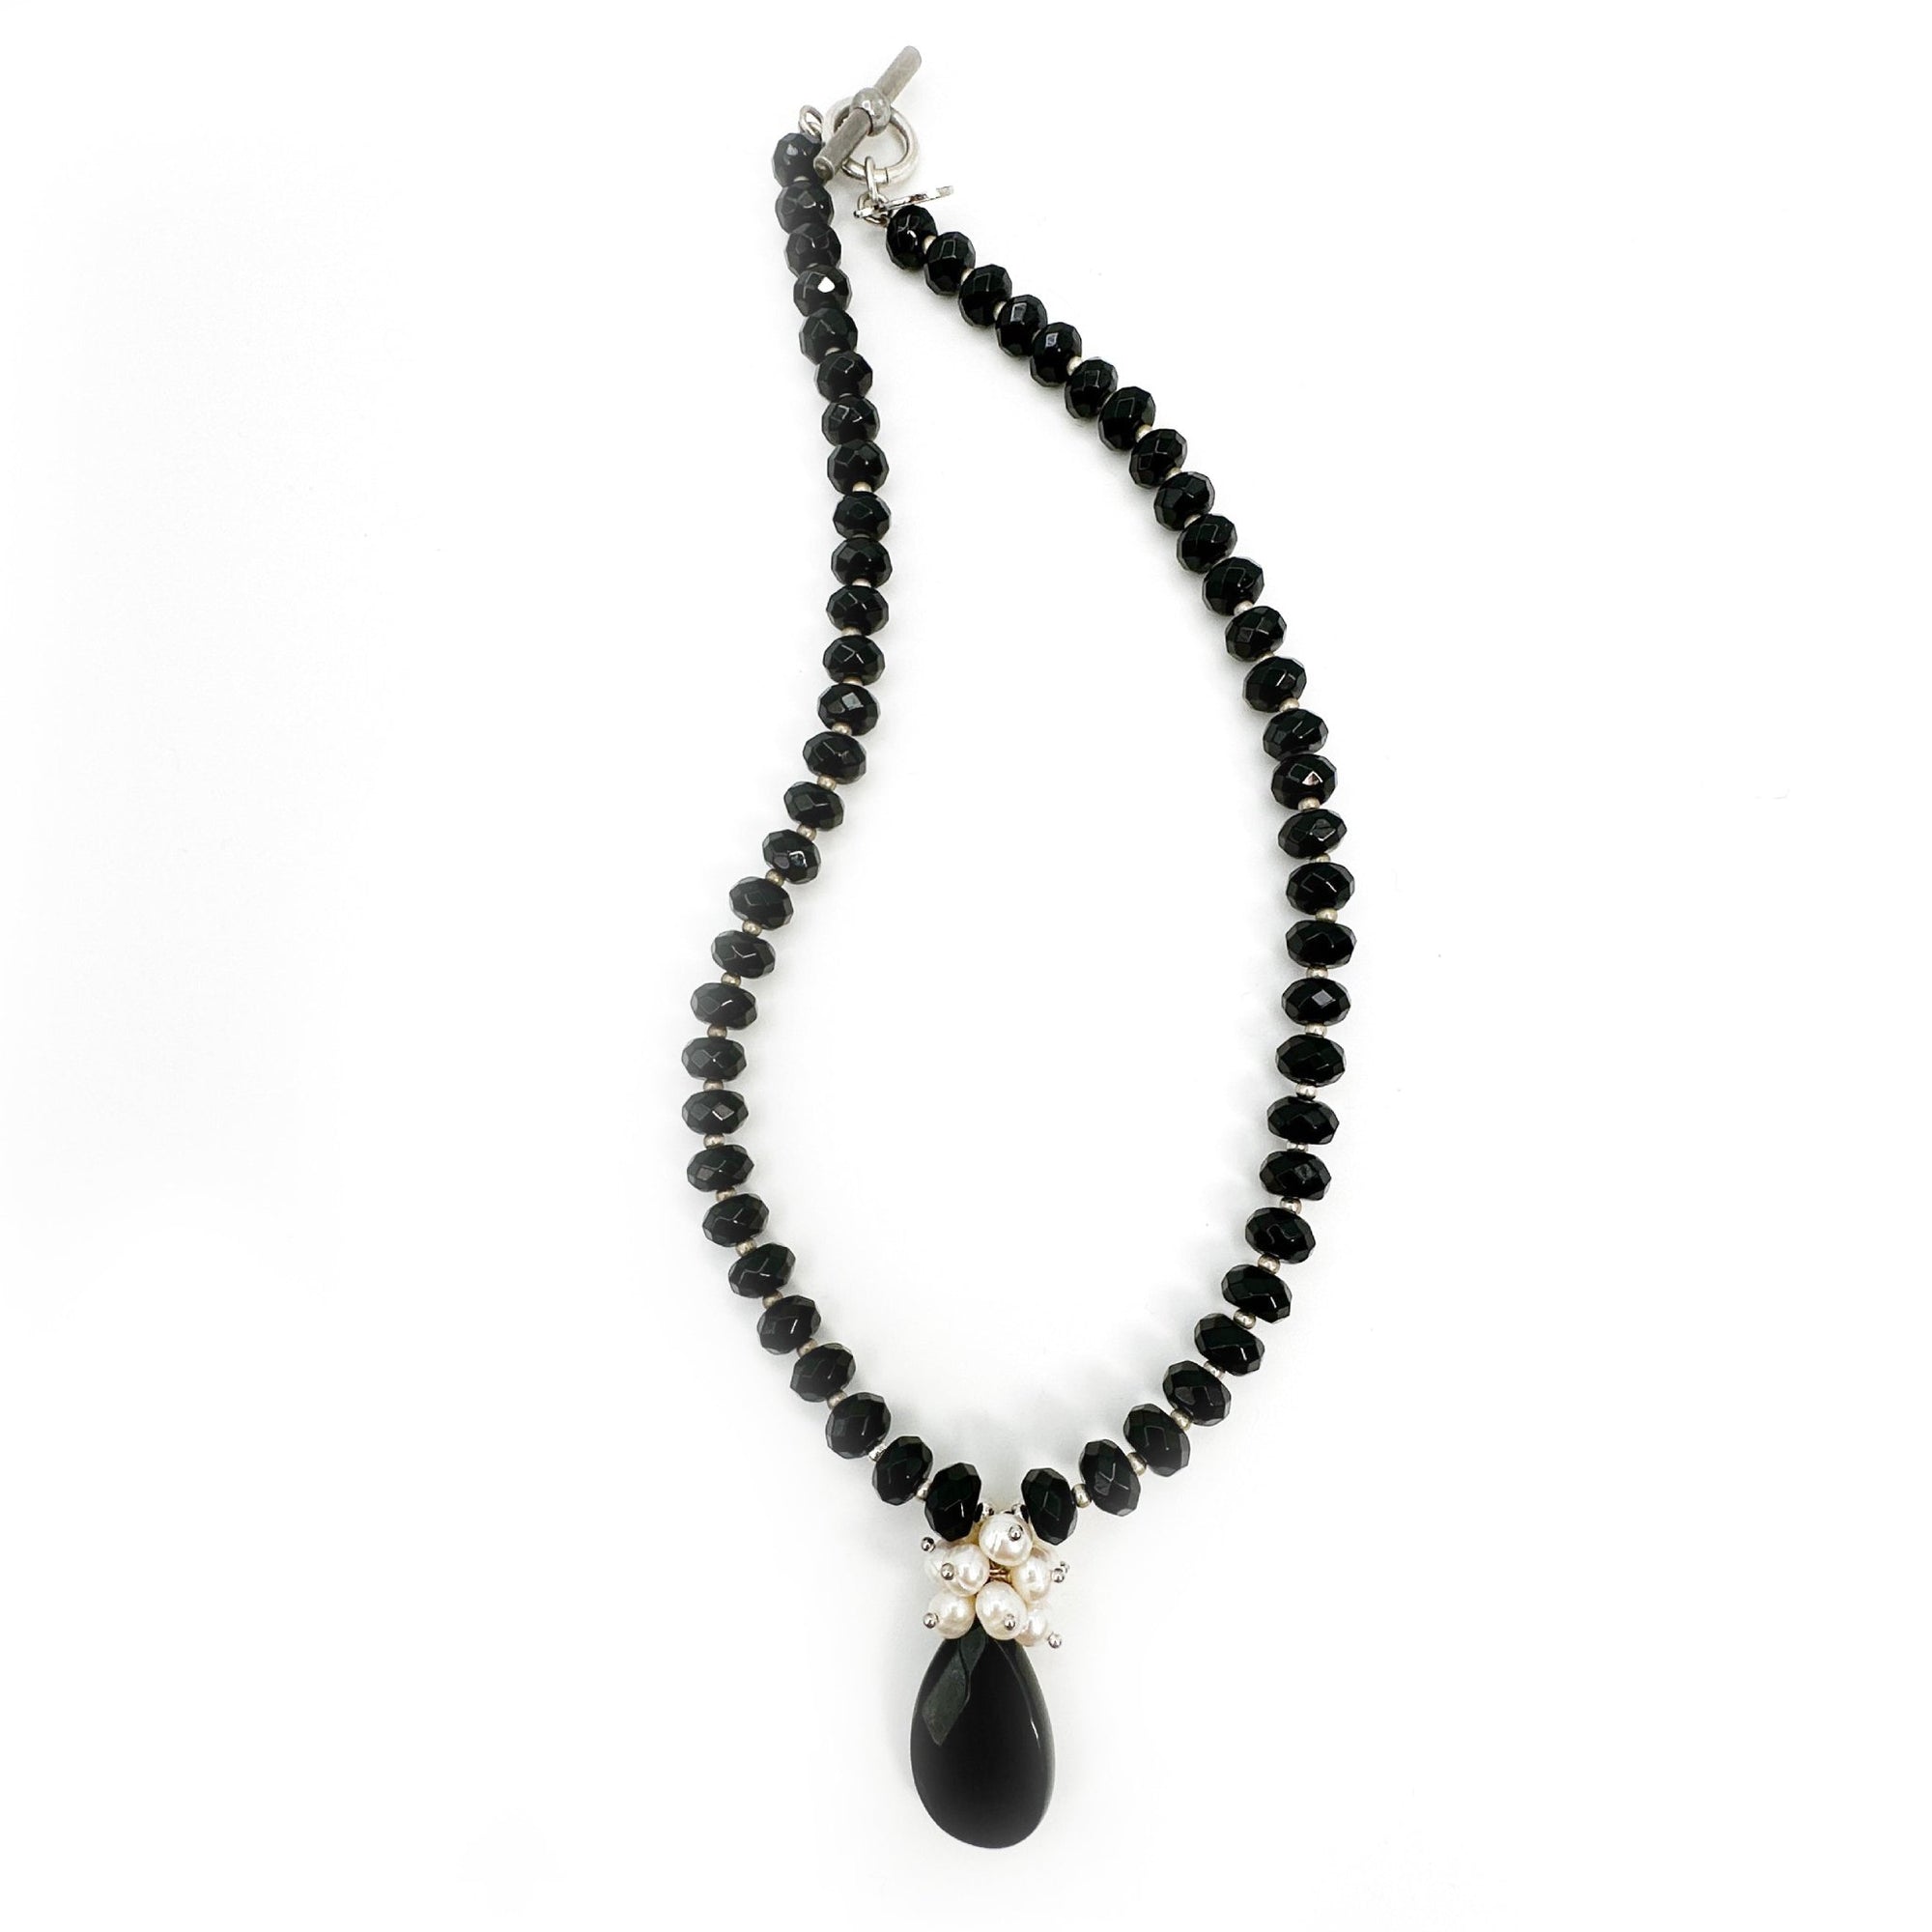 Rondelle Stone Necklace with Faceted Teardrop & Pearls